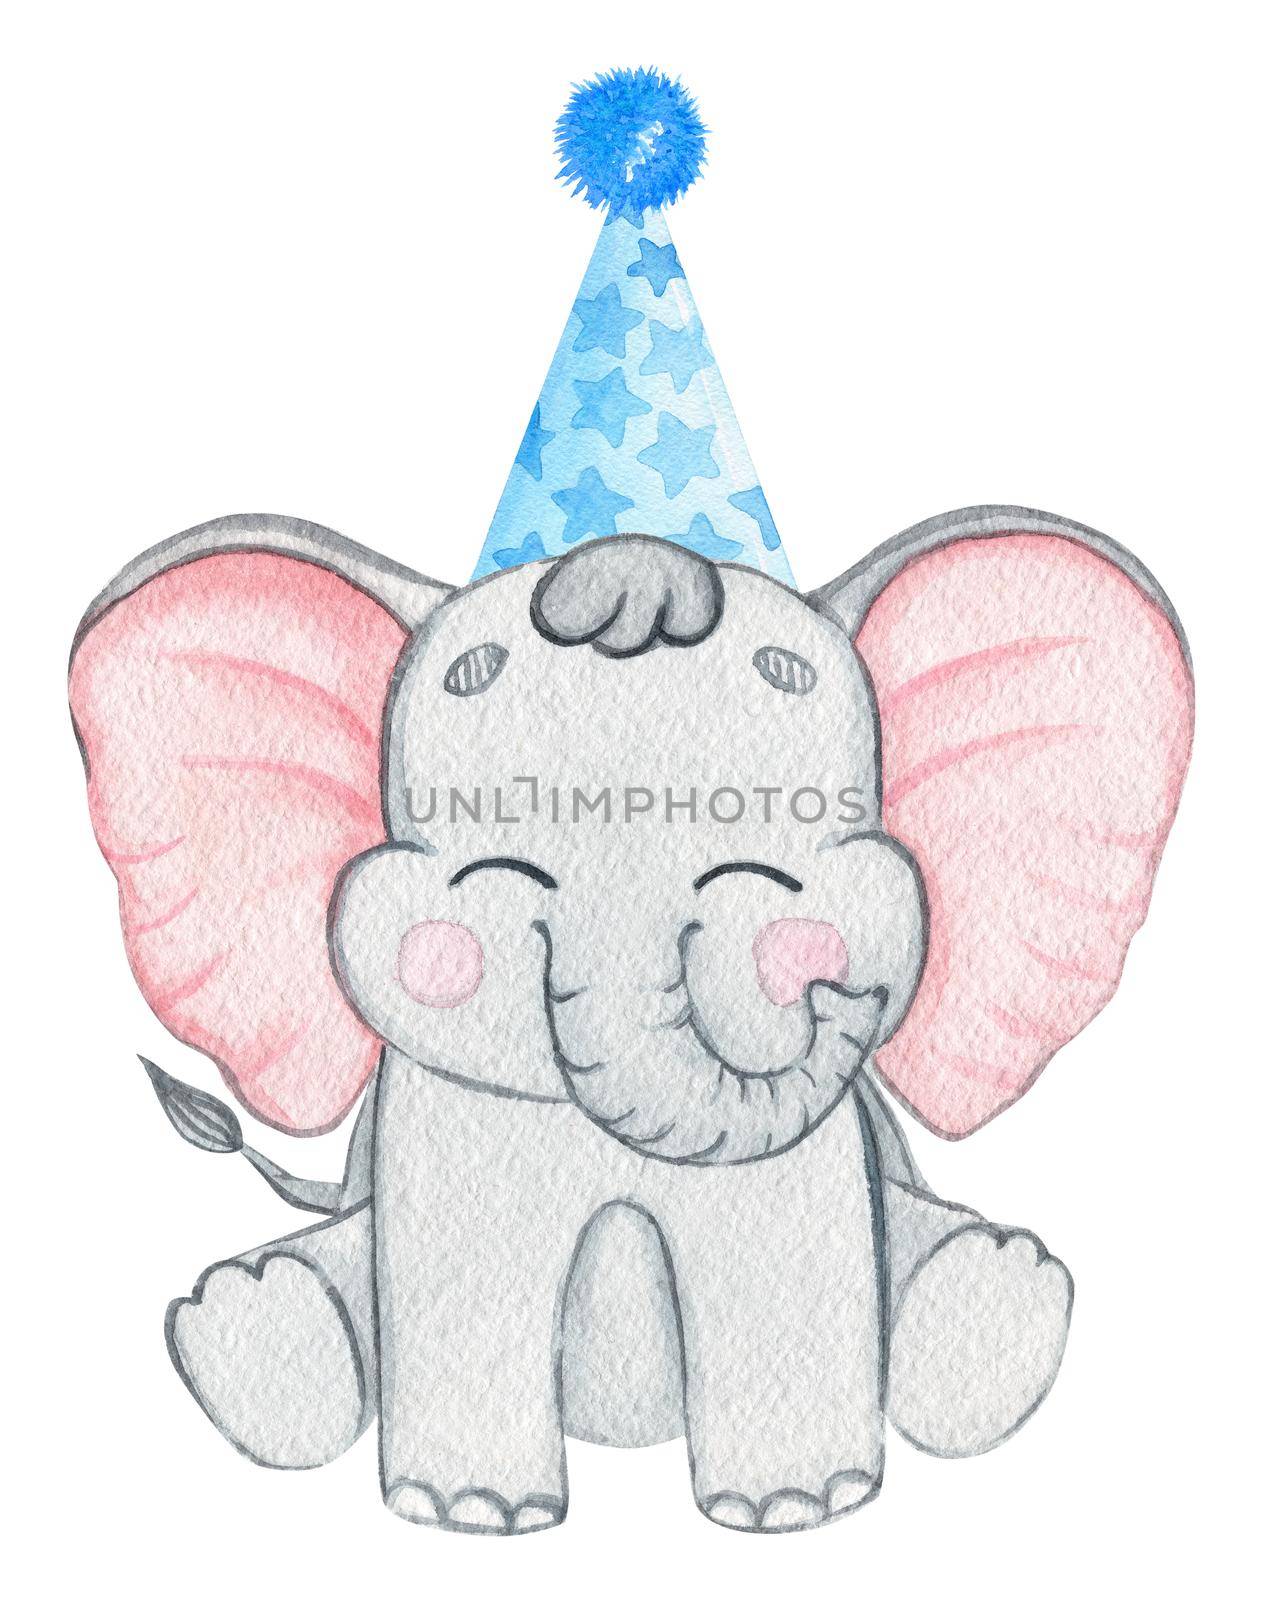 Watercolor elephant in blue party cap isolated on white background by dreamloud